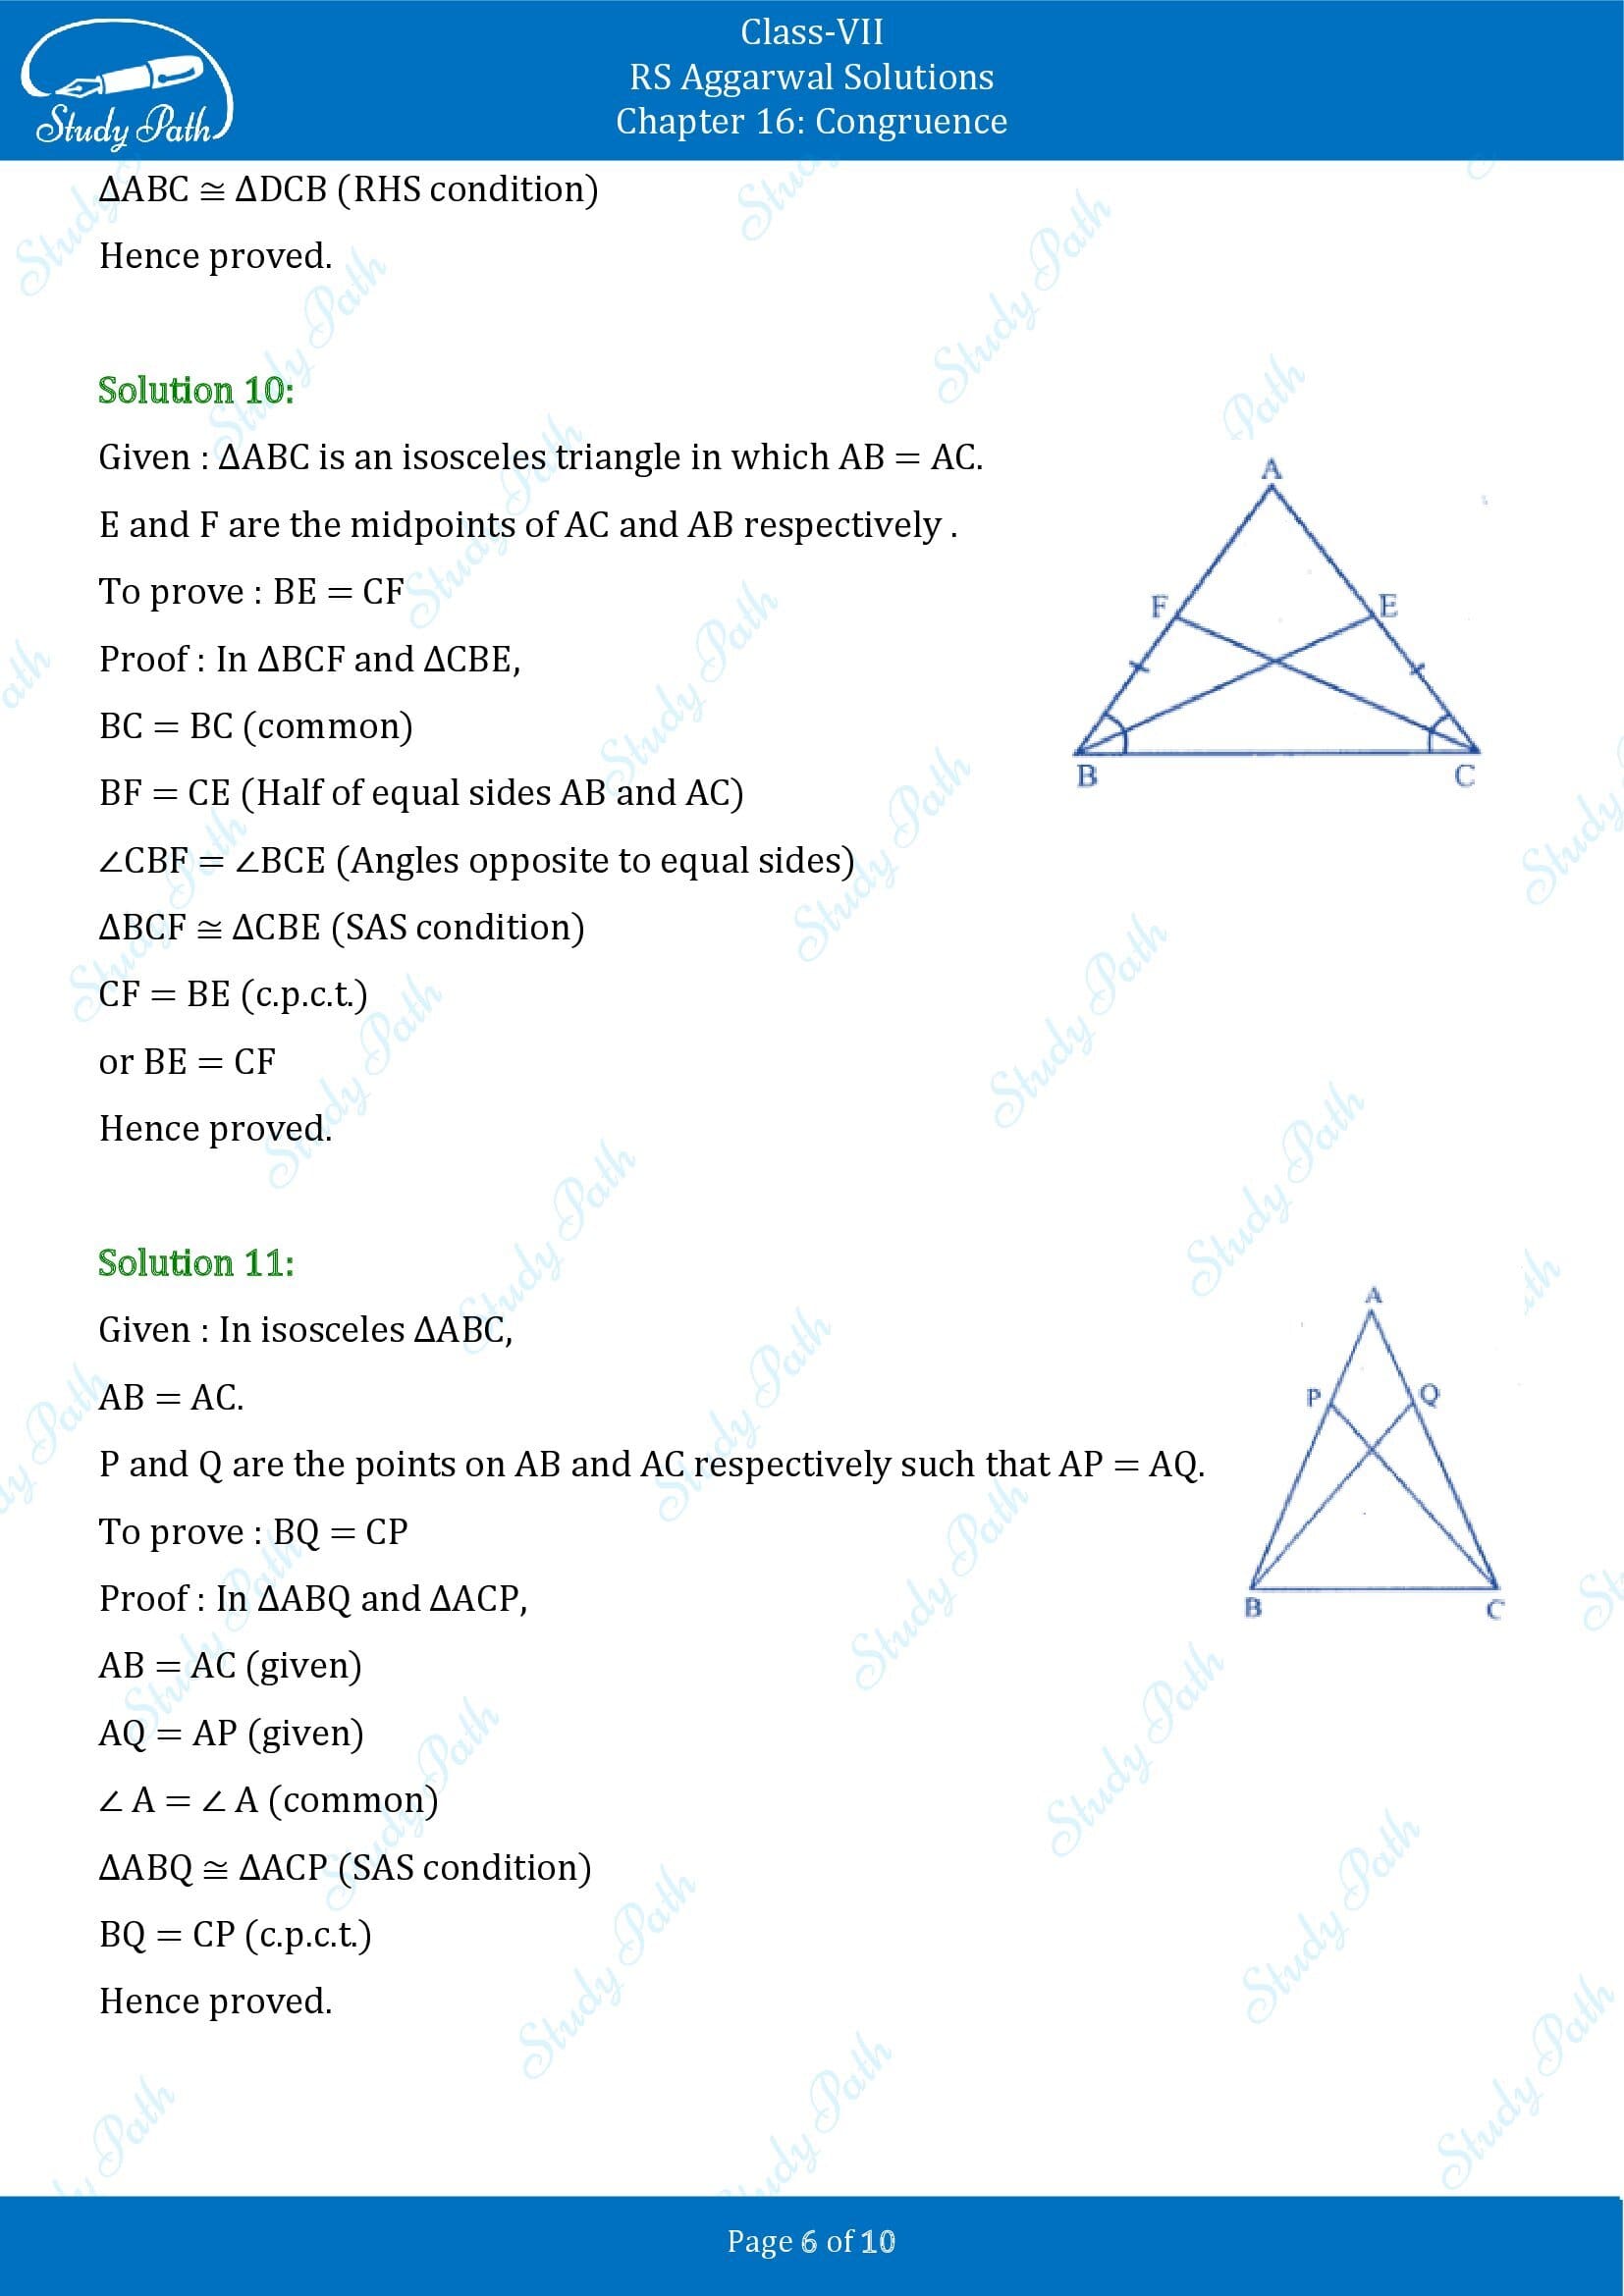 RS Aggarwal Solutions Class 7 Chapter 16 Congruence 00006